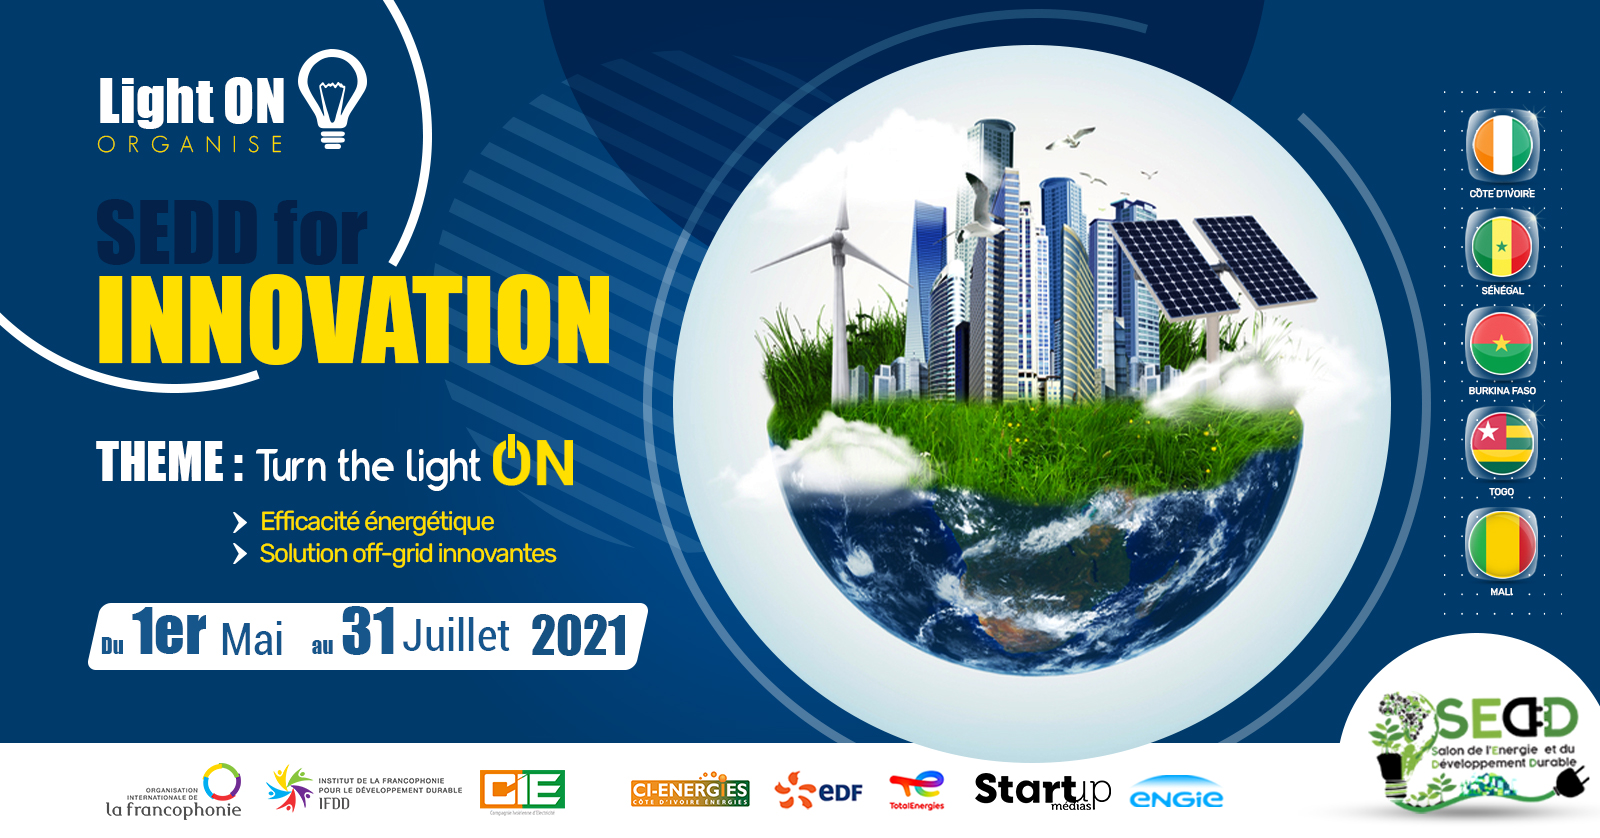 SEDD innovation concours startup